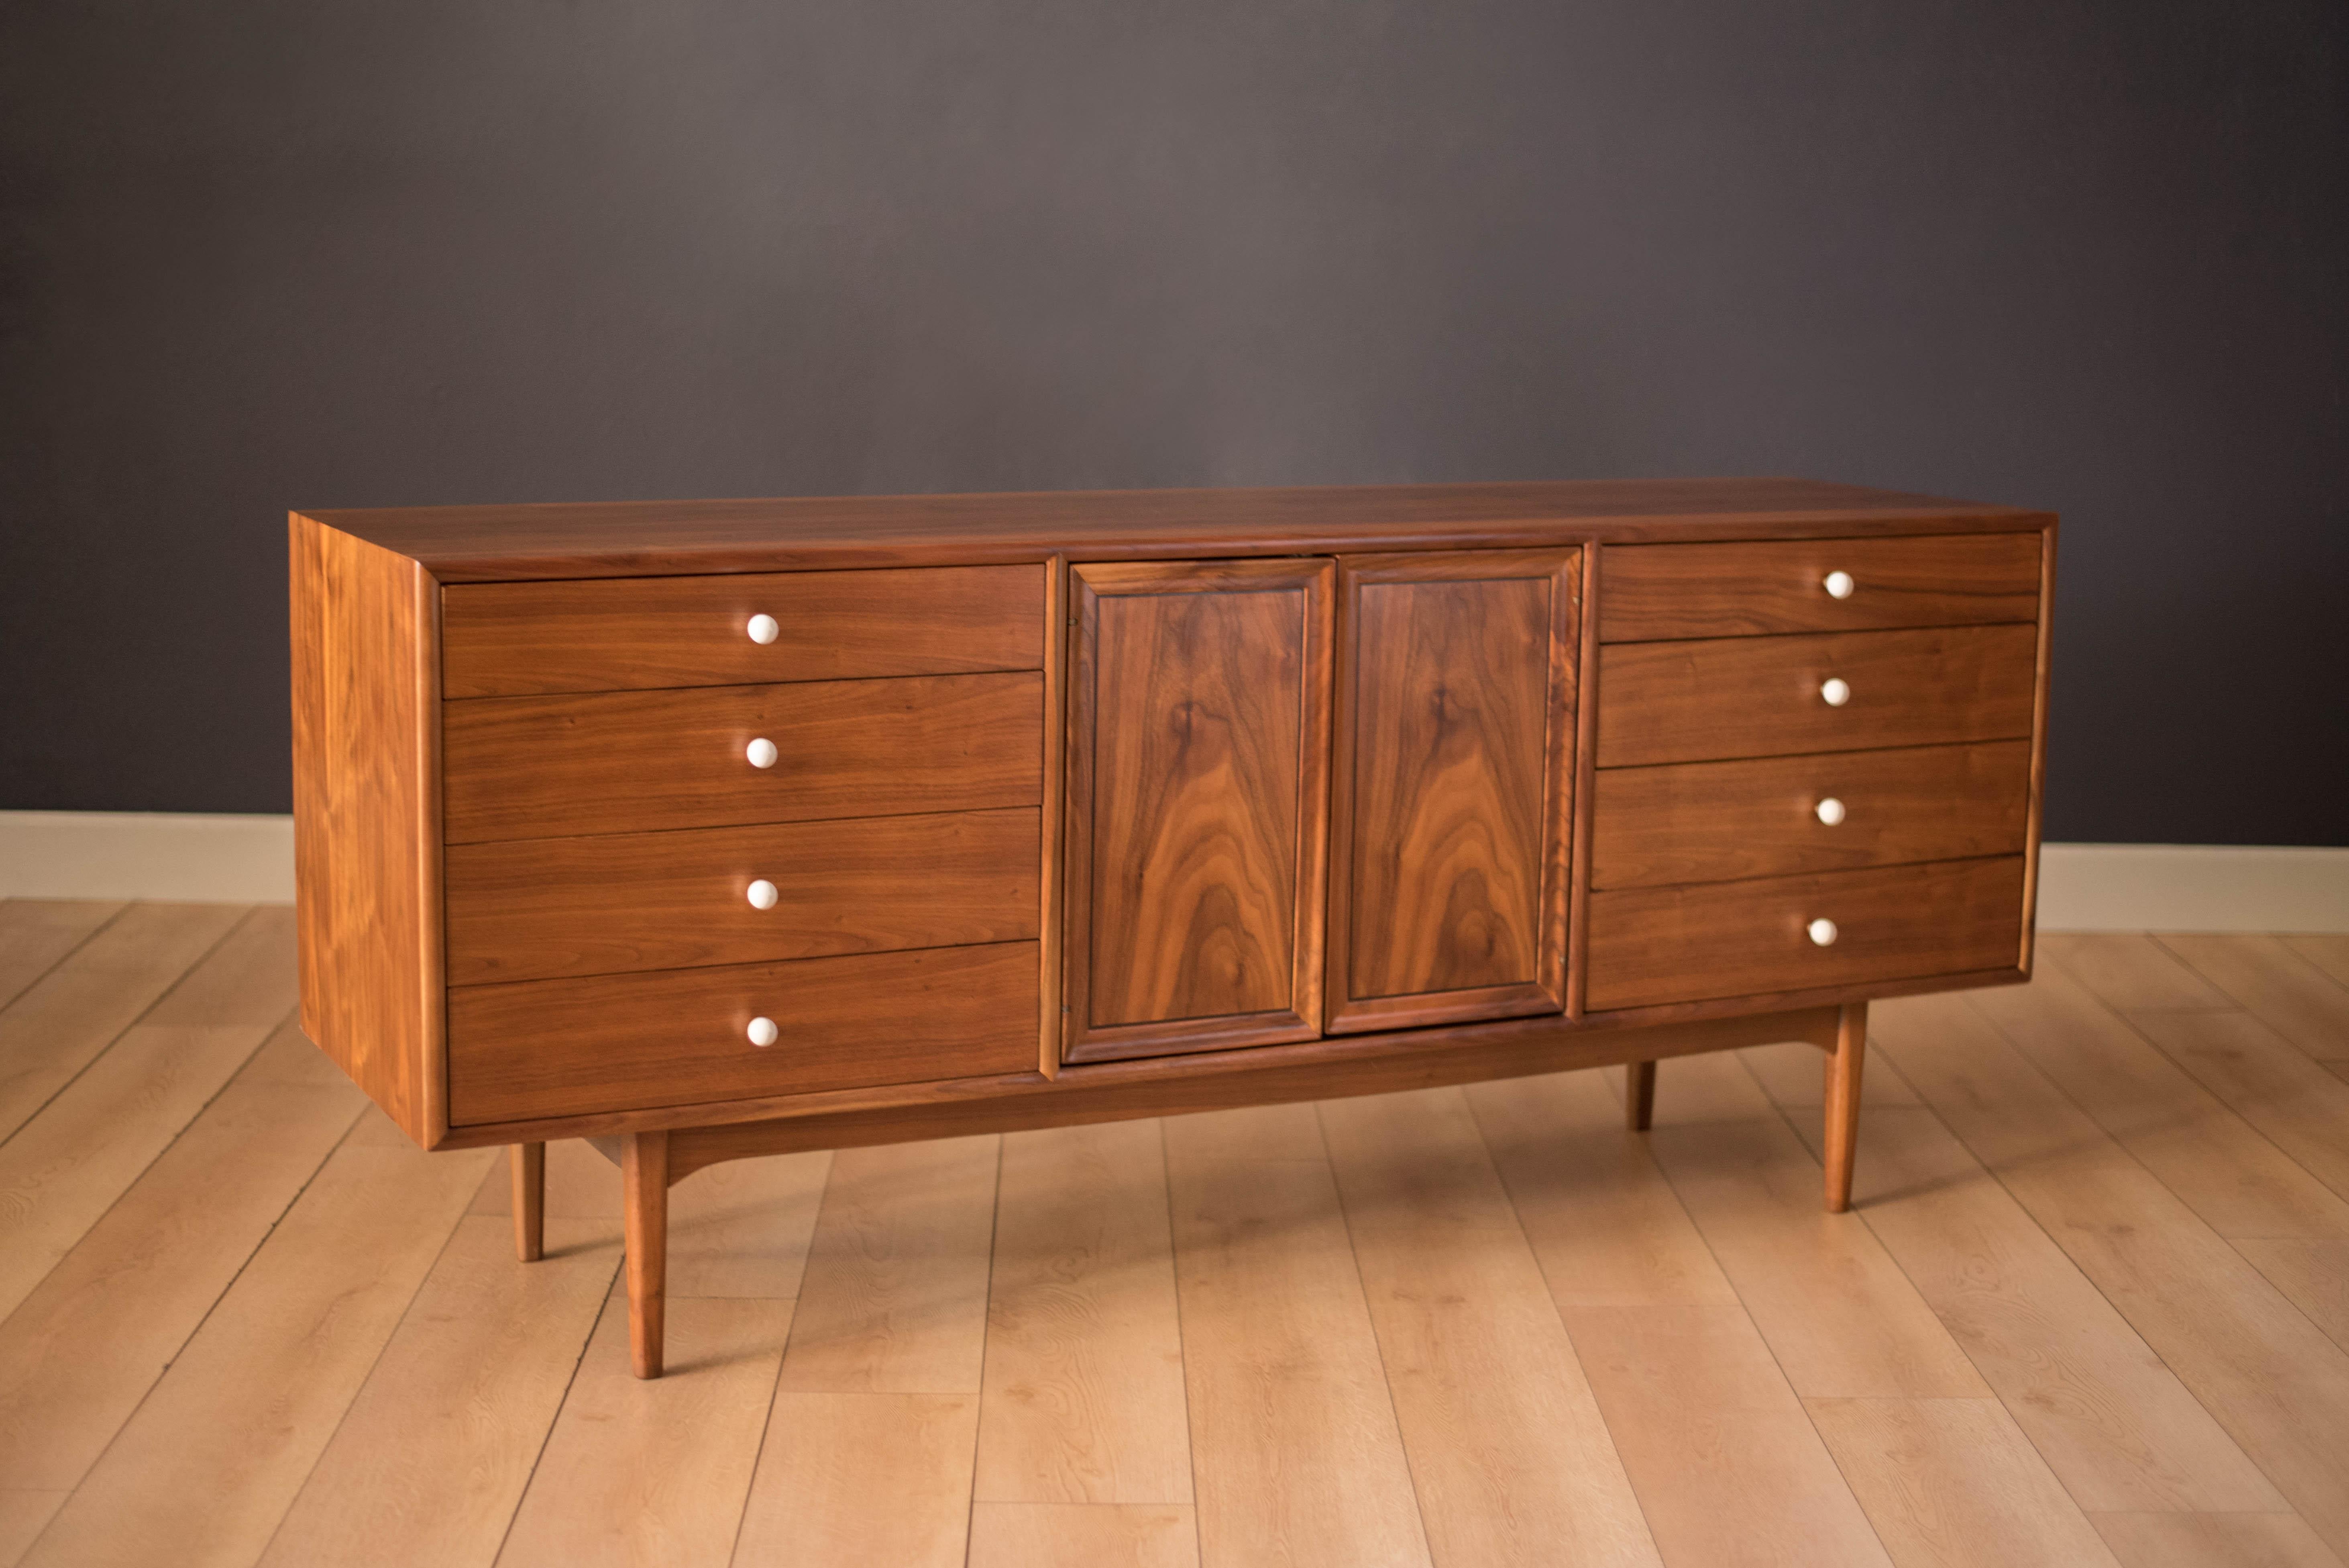 Mid century Drexel declaration dresser designed by Kipp Stewart and Stewart MacDougall. This piece features bookmatched black walnut grains highlighted by the collection's signature white porcelain and brass pulls. Offers plenty of storage including